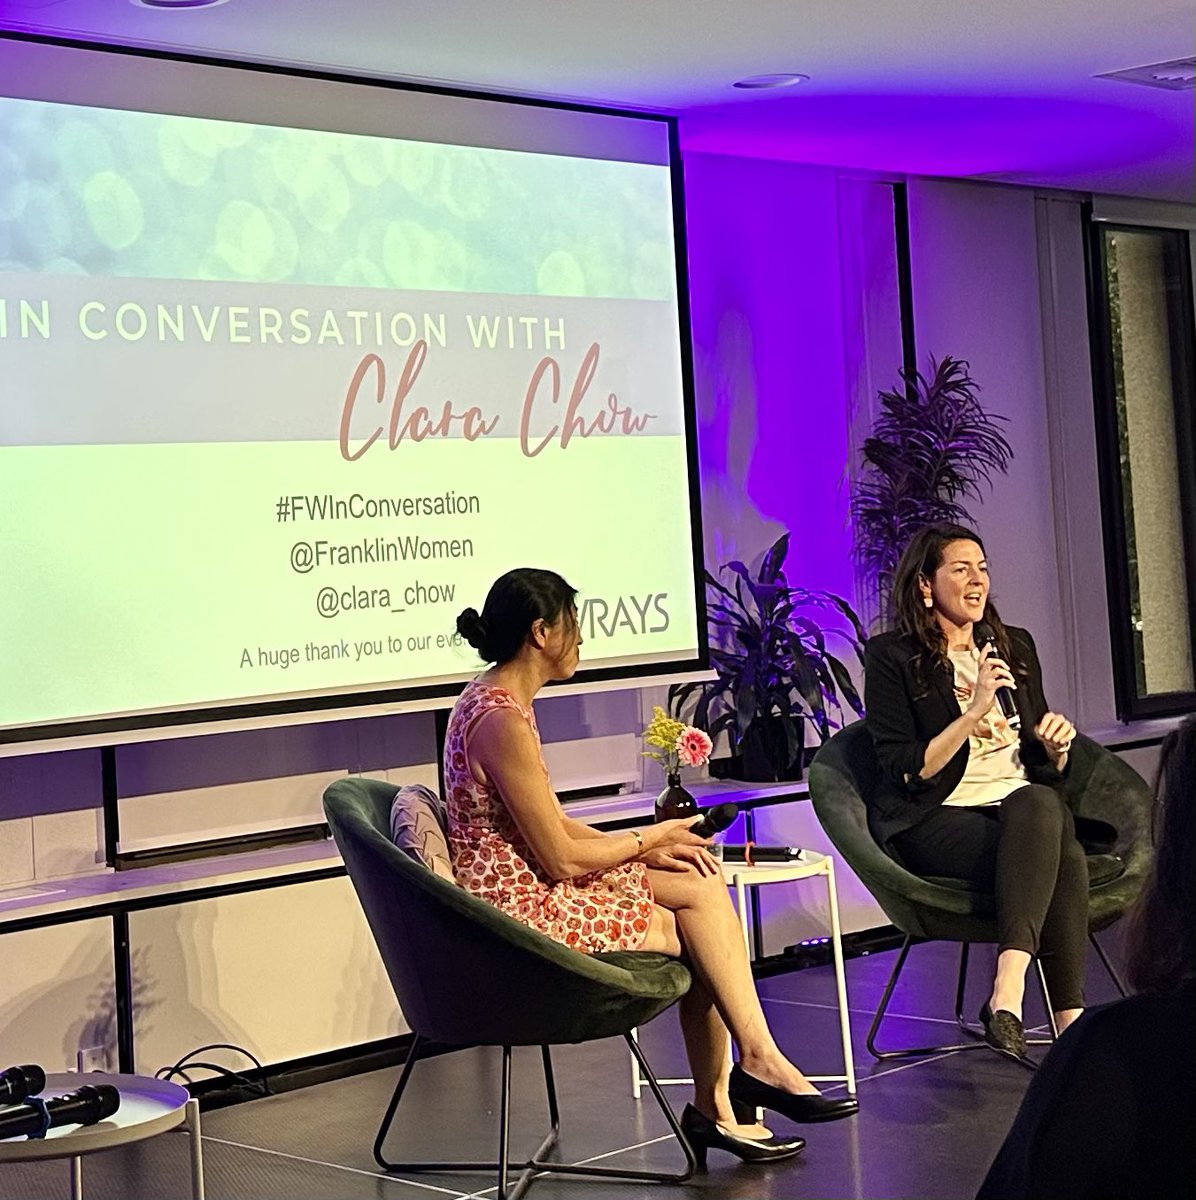 Attending In conversation with Prof Clara Chow and listening to the importance of sponsors in our journeys and experiential diversity, both close to my ❤️ #FWinconversation 
@clara_chow